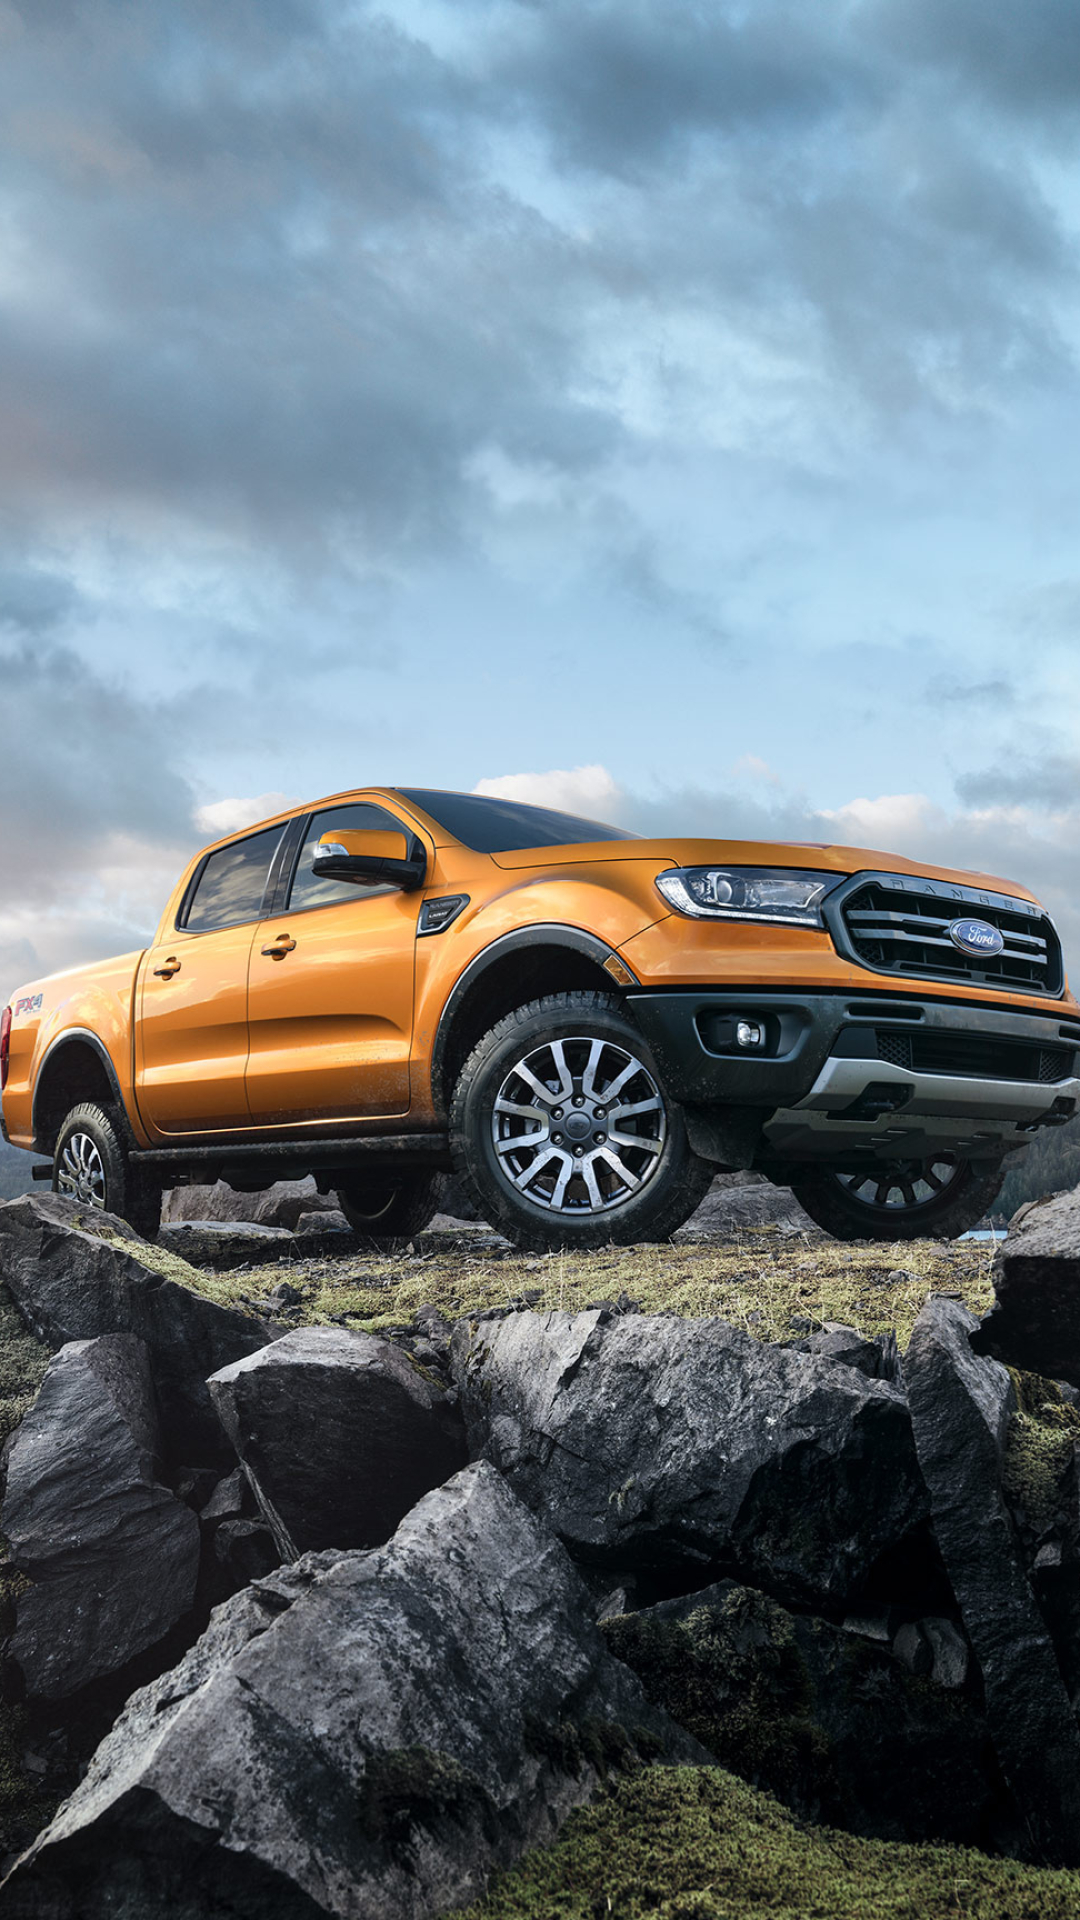 Ford Ranger: The Splash was a sub-model of the second-generation Introduced for the 1993 model year. 1080x1920 Full HD Wallpaper.